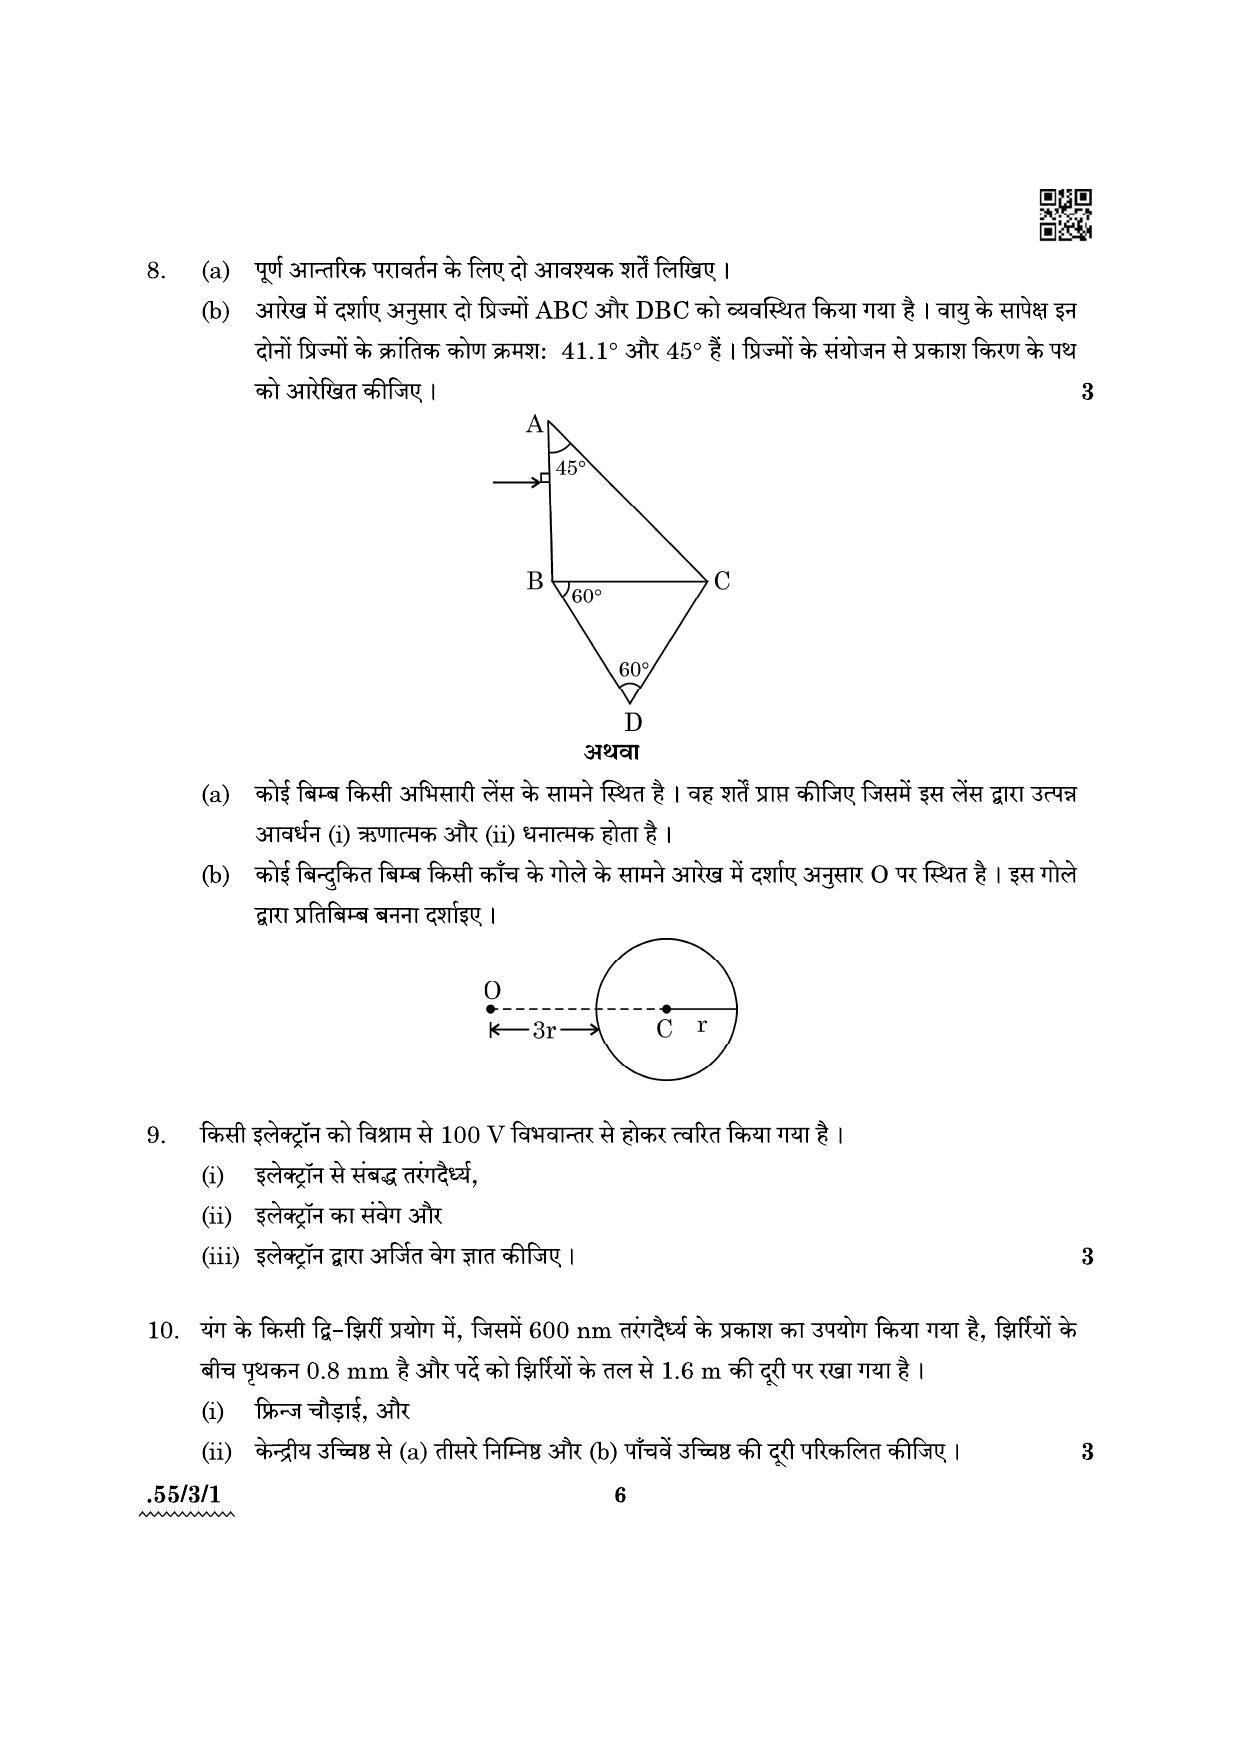 CBSE Class 12 55-3-1 Physics 2022 Question Paper - Page 6